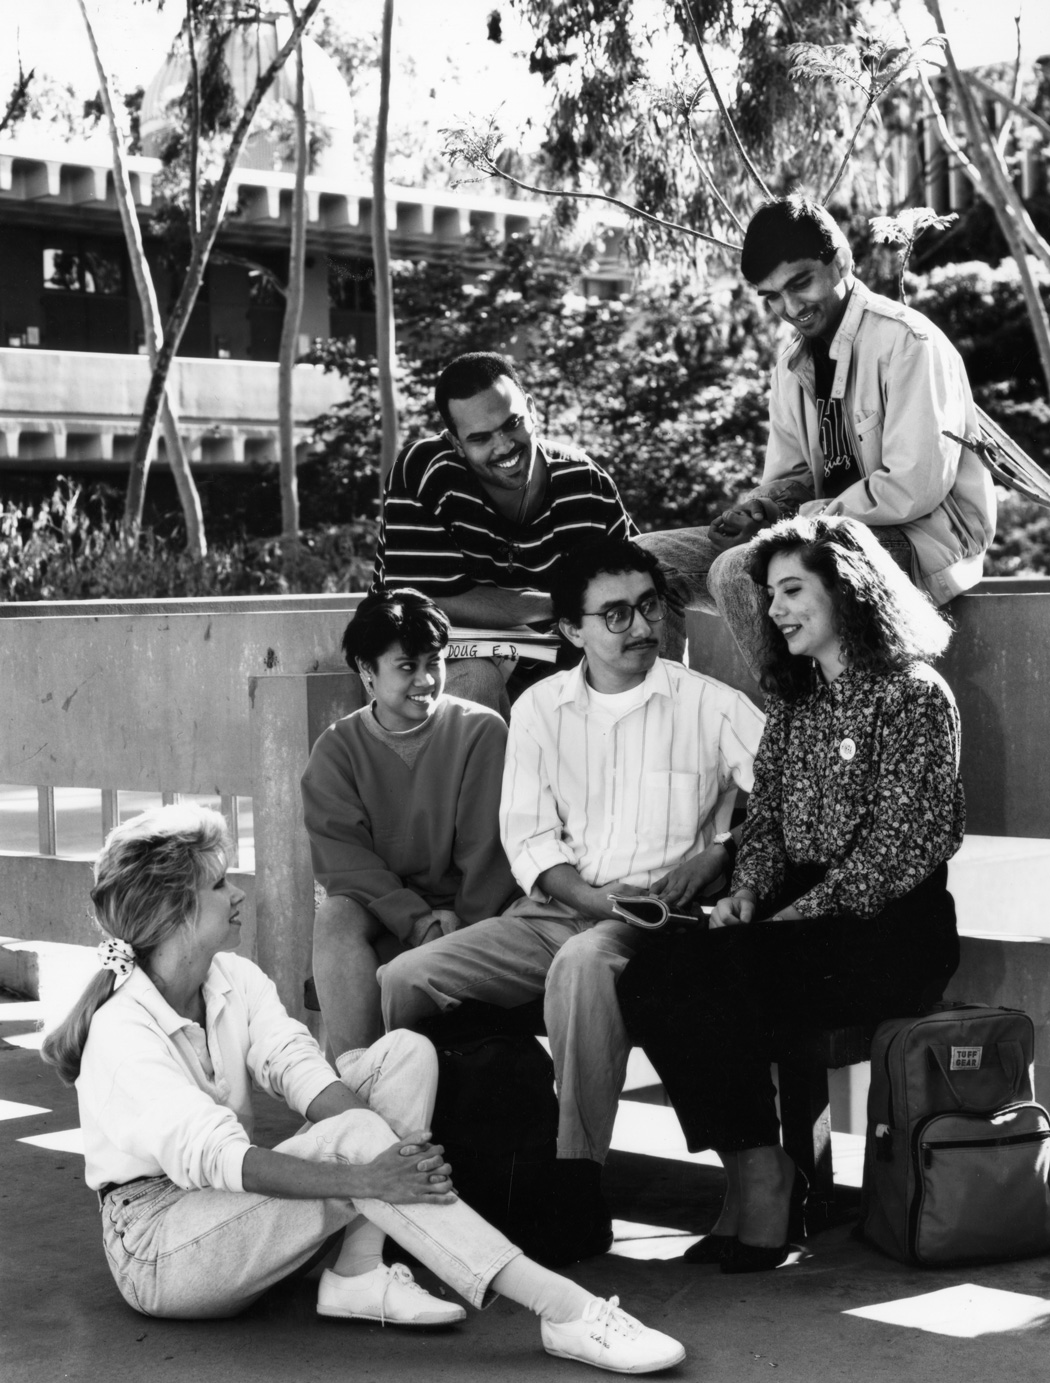 Students gathered across from the Social and Behavioral Sciences Building, ca. 1990s building, ca. 1990s